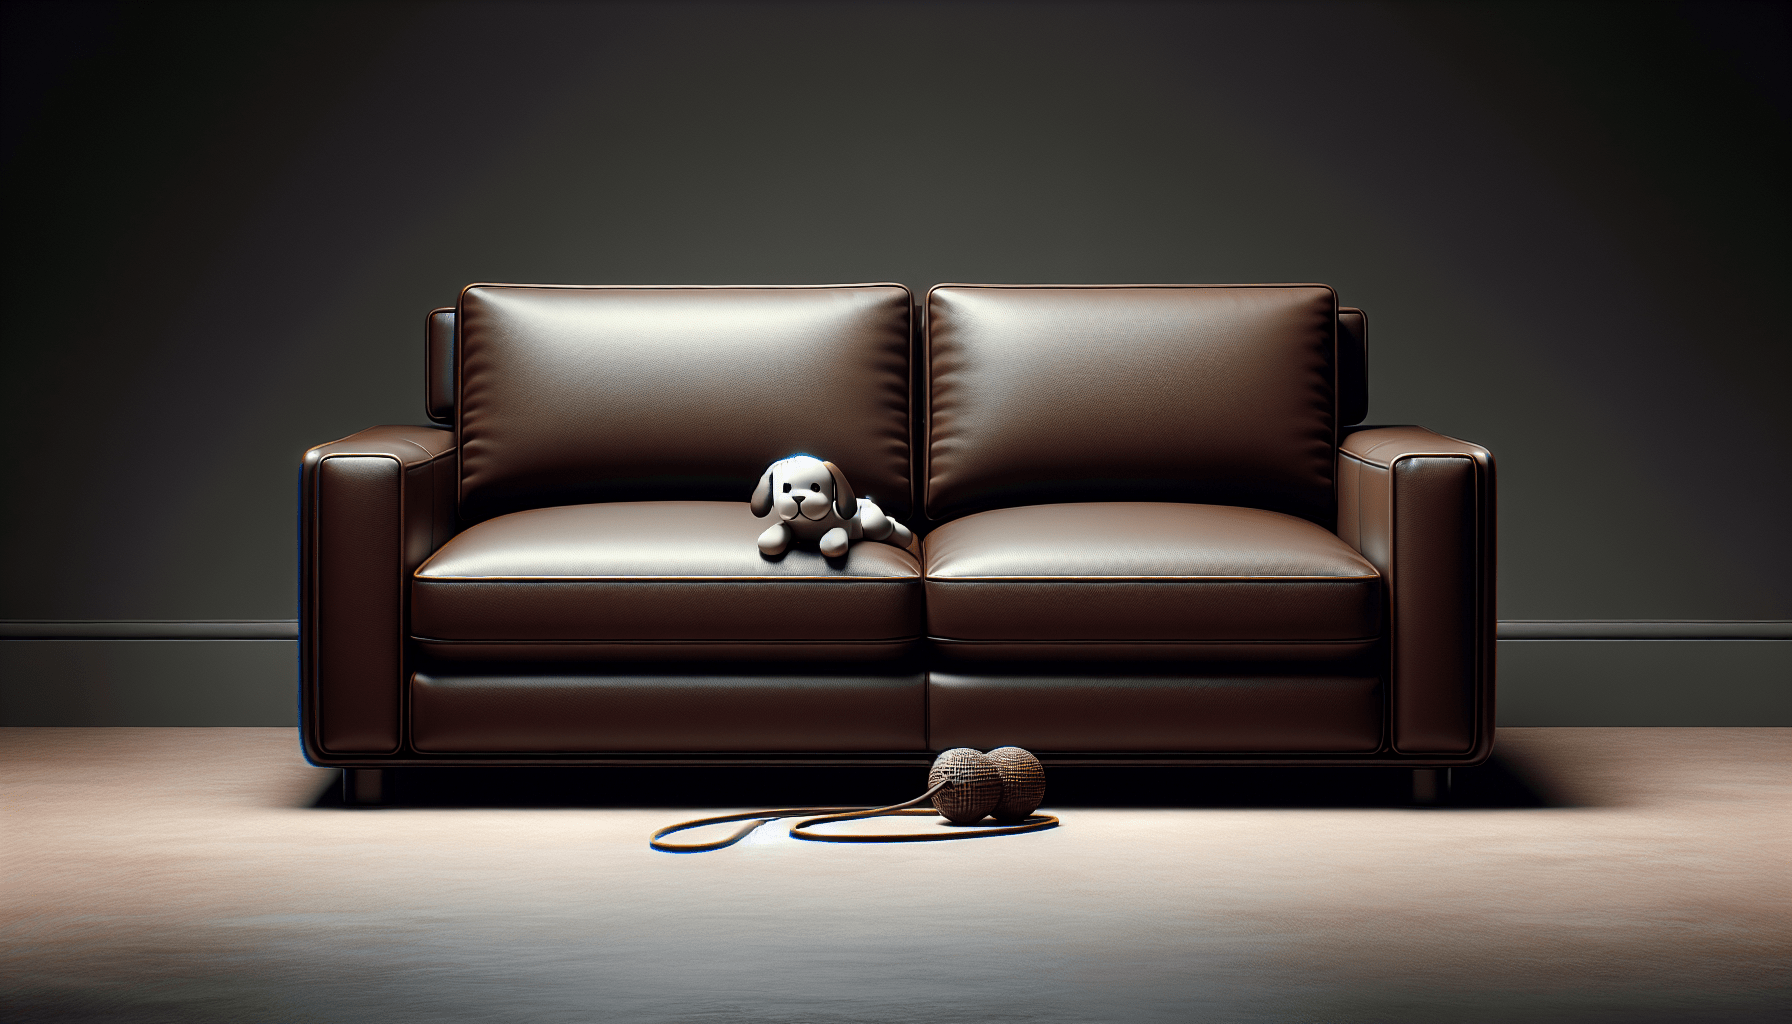 What Sofas Are Best Dog Proof?